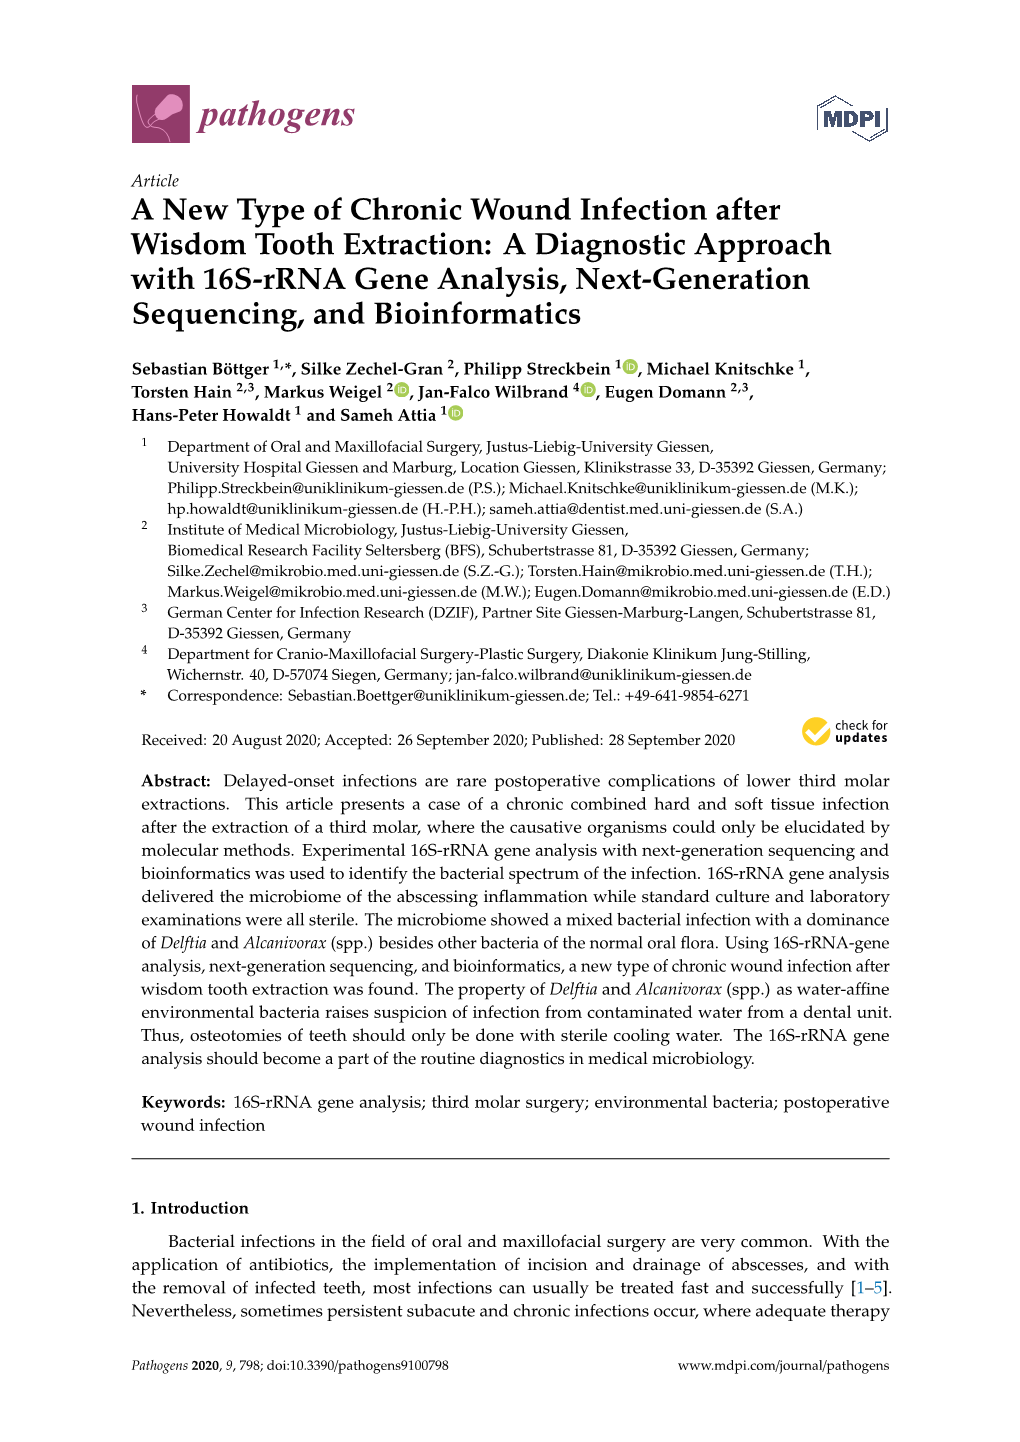 A New Type of Chronic Wound Infection After Wisdom Tooth Extraction: a Diagnostic Approach with 16S-Rrna Gene Analysis, Next-Generation Sequencing, and Bioinformatics